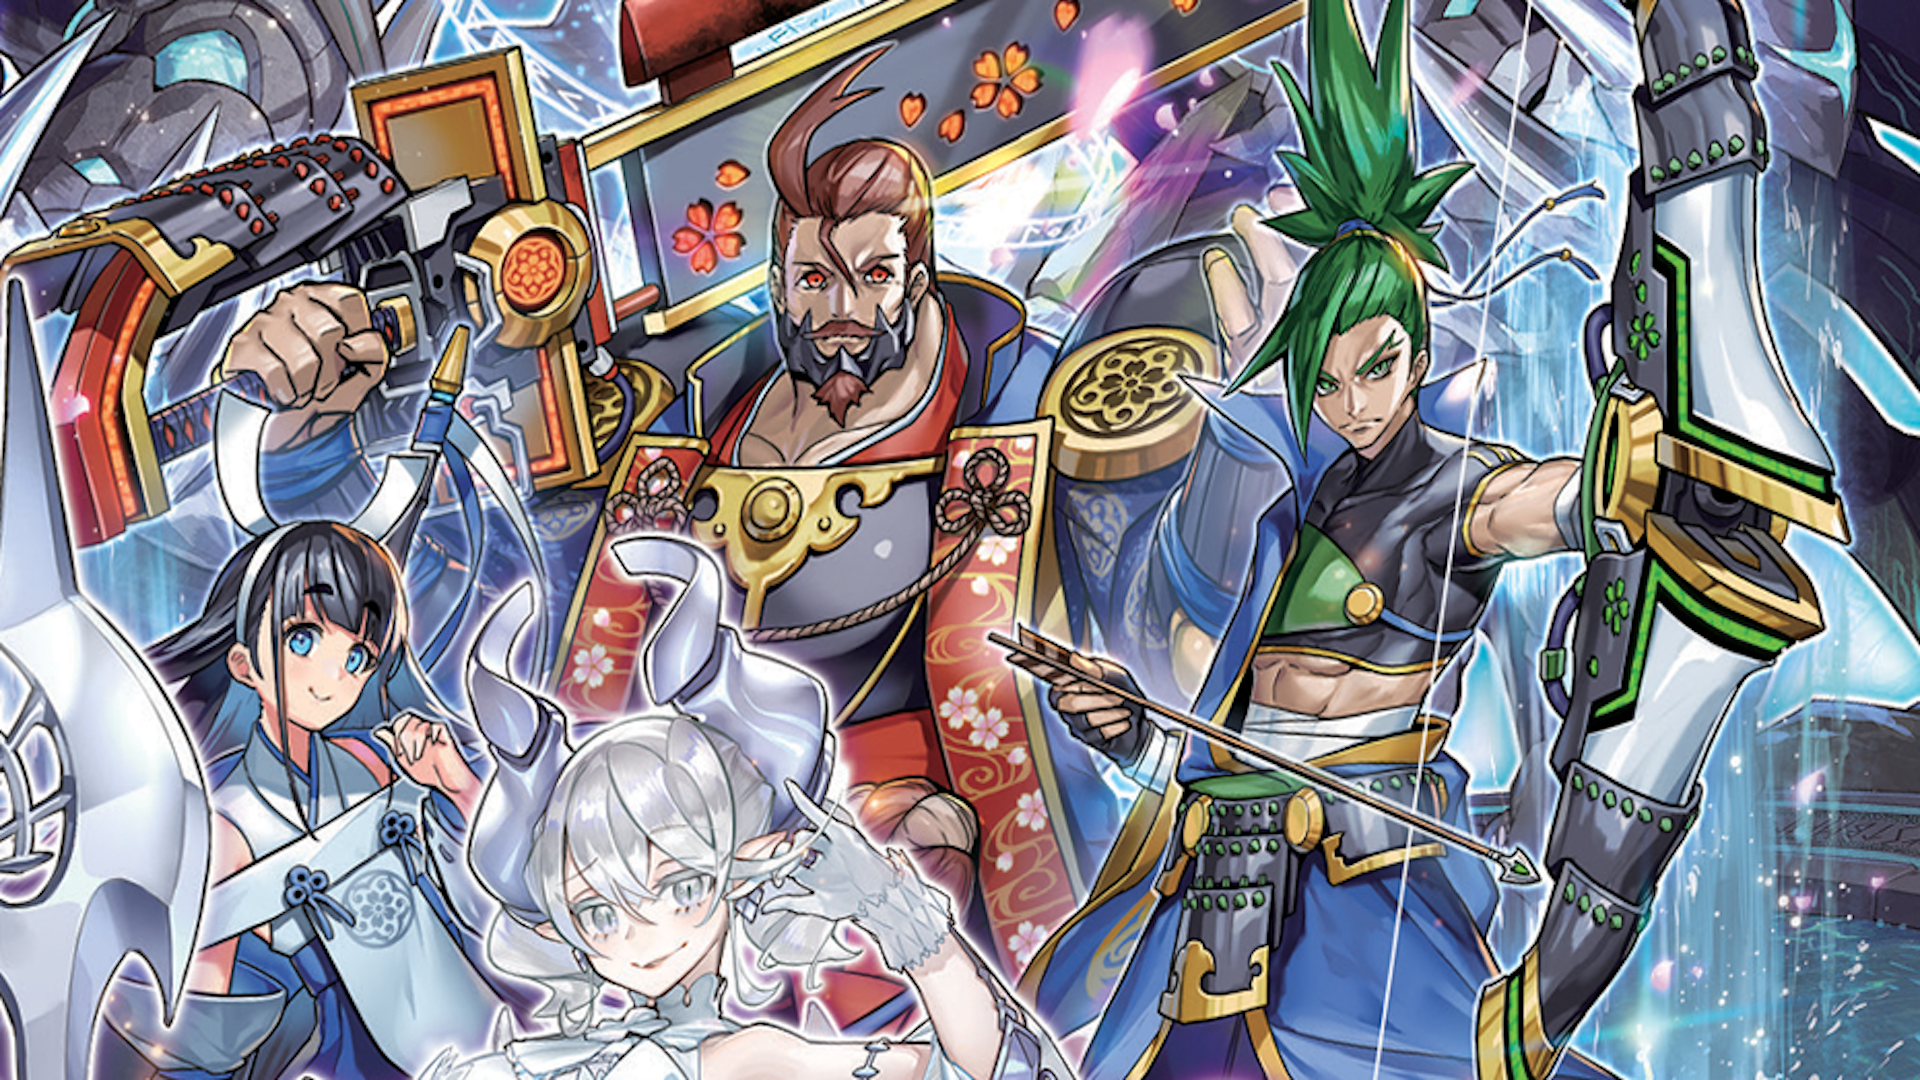 Art for the Tactical Masters booster set for Yu-Gi-Oh! TCG